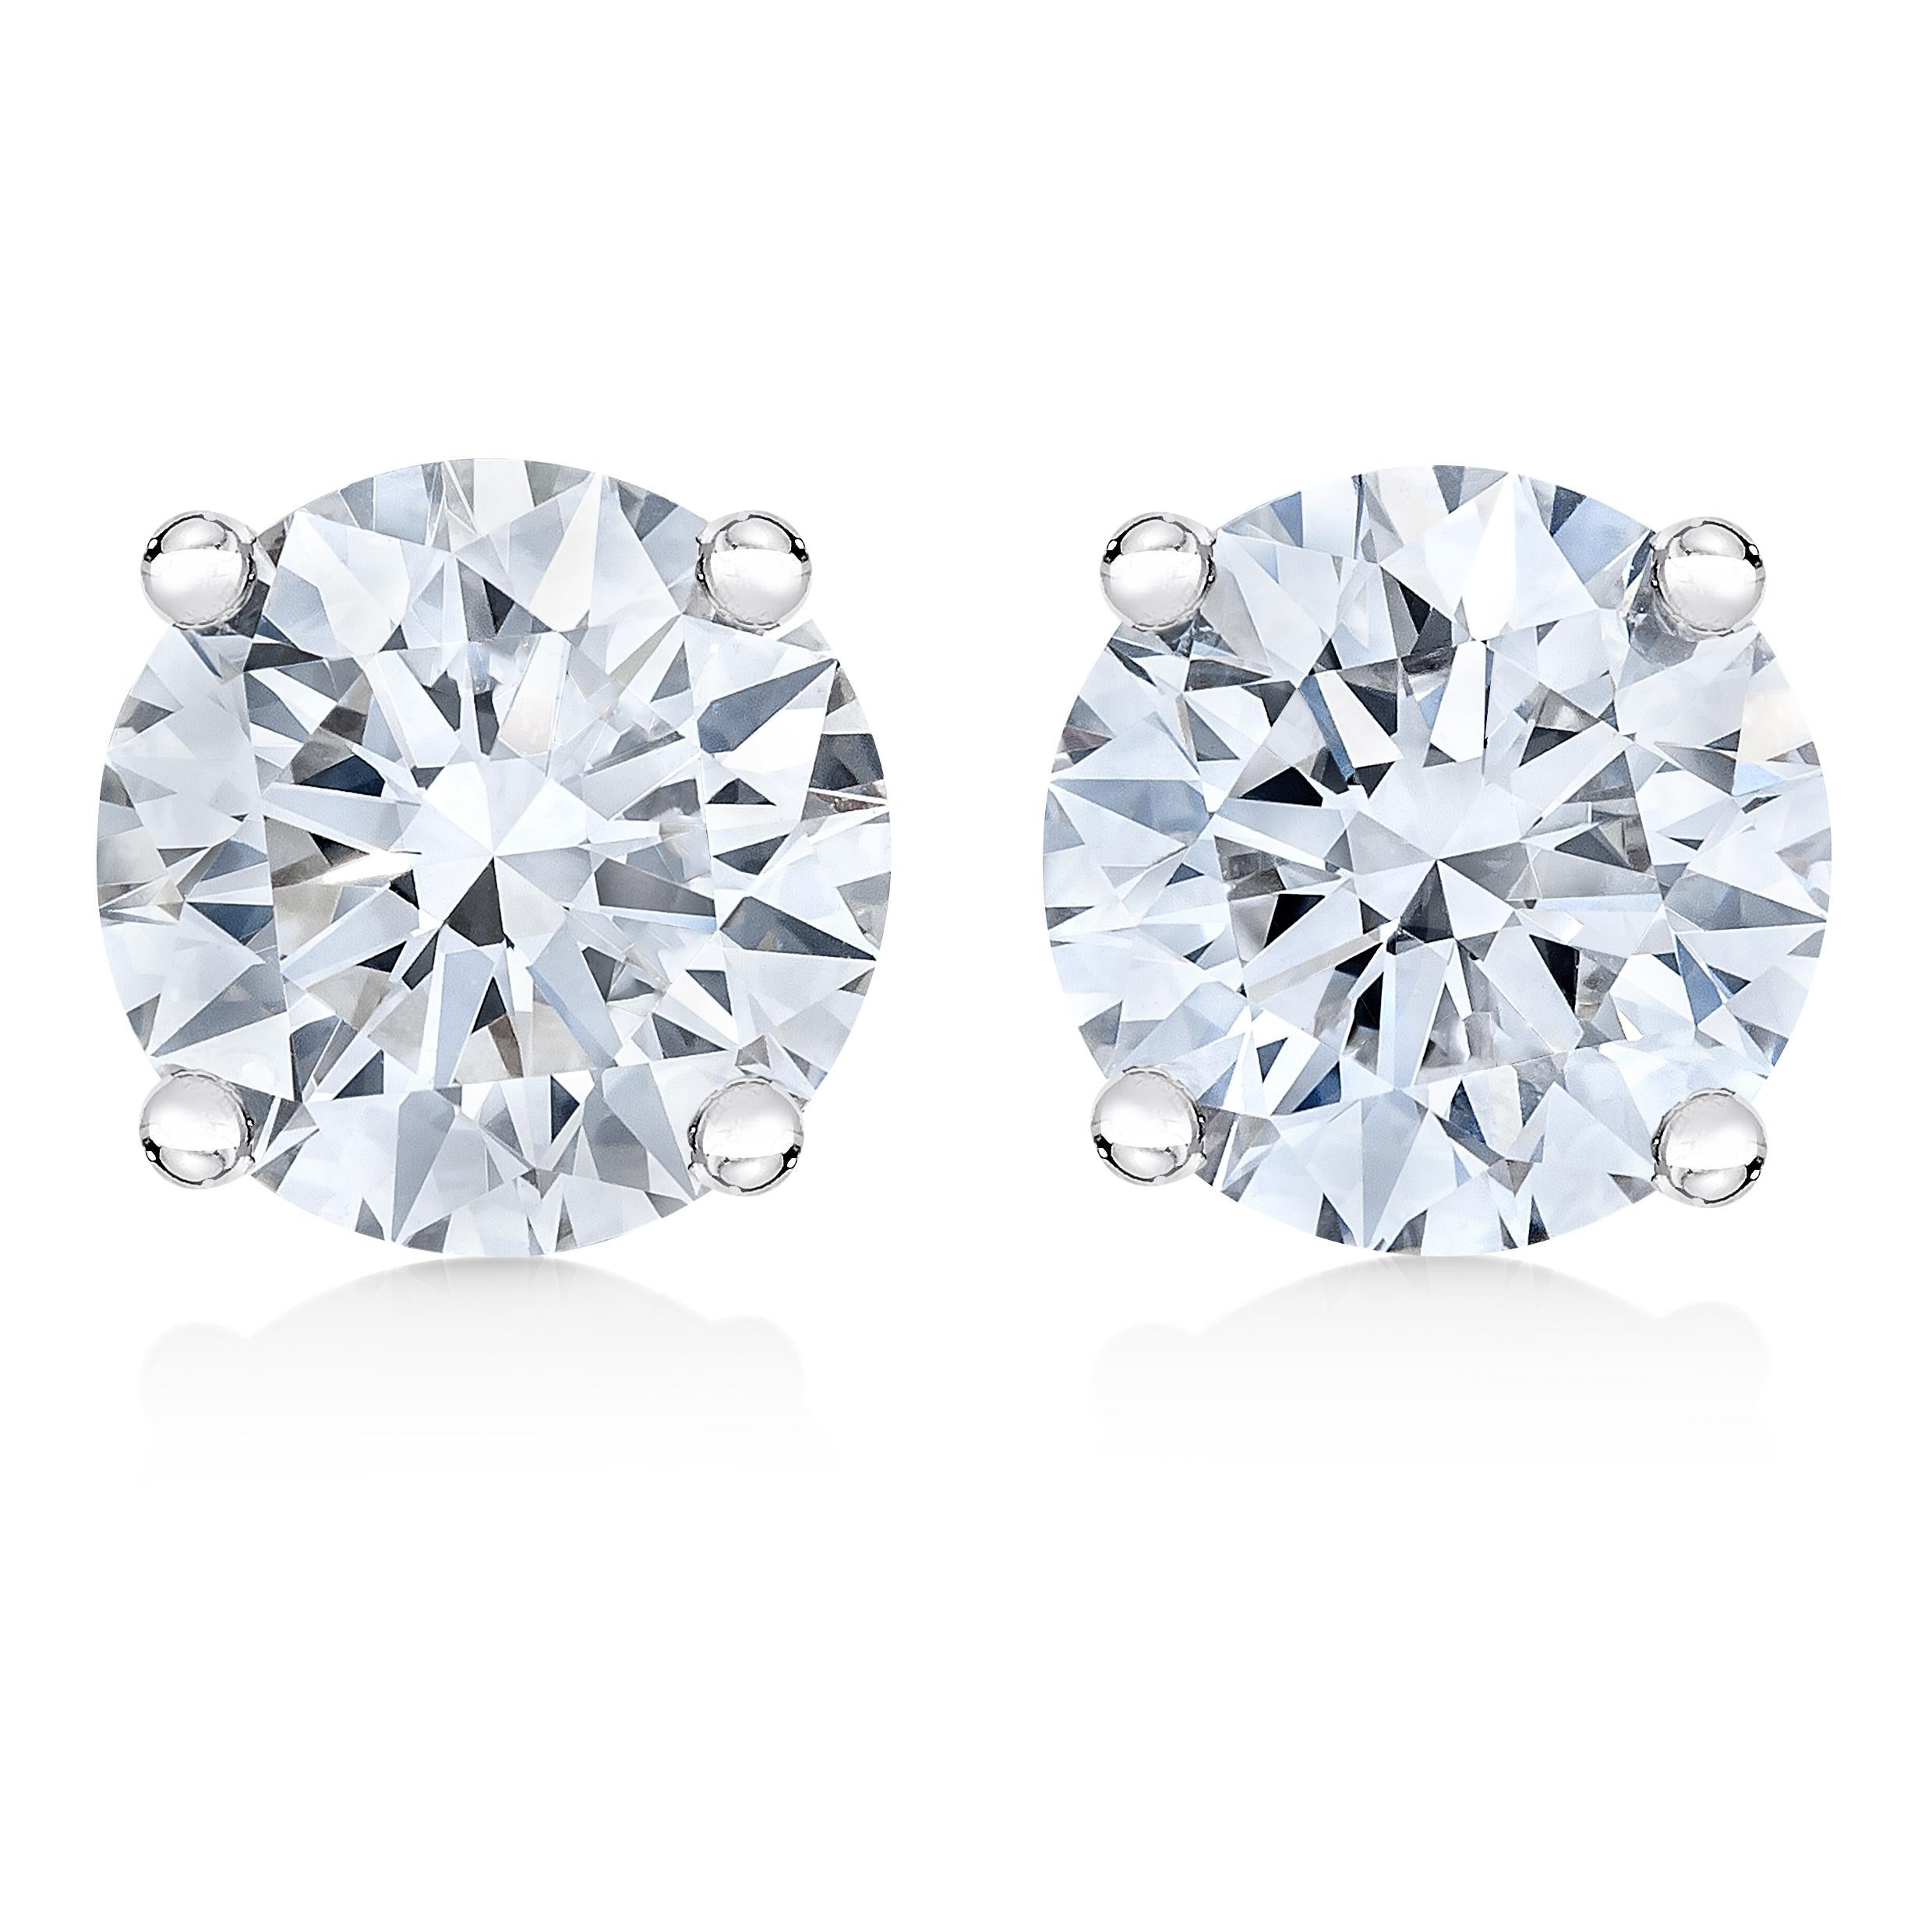 Two gorgeous white diamonds sit in a prong setting on these sparkling stud earrings. Crafted in cool weaves of 14K white gold, these diamond stud earrings feature a high polish finish and secure with a screw on mechanism. These stunning gold